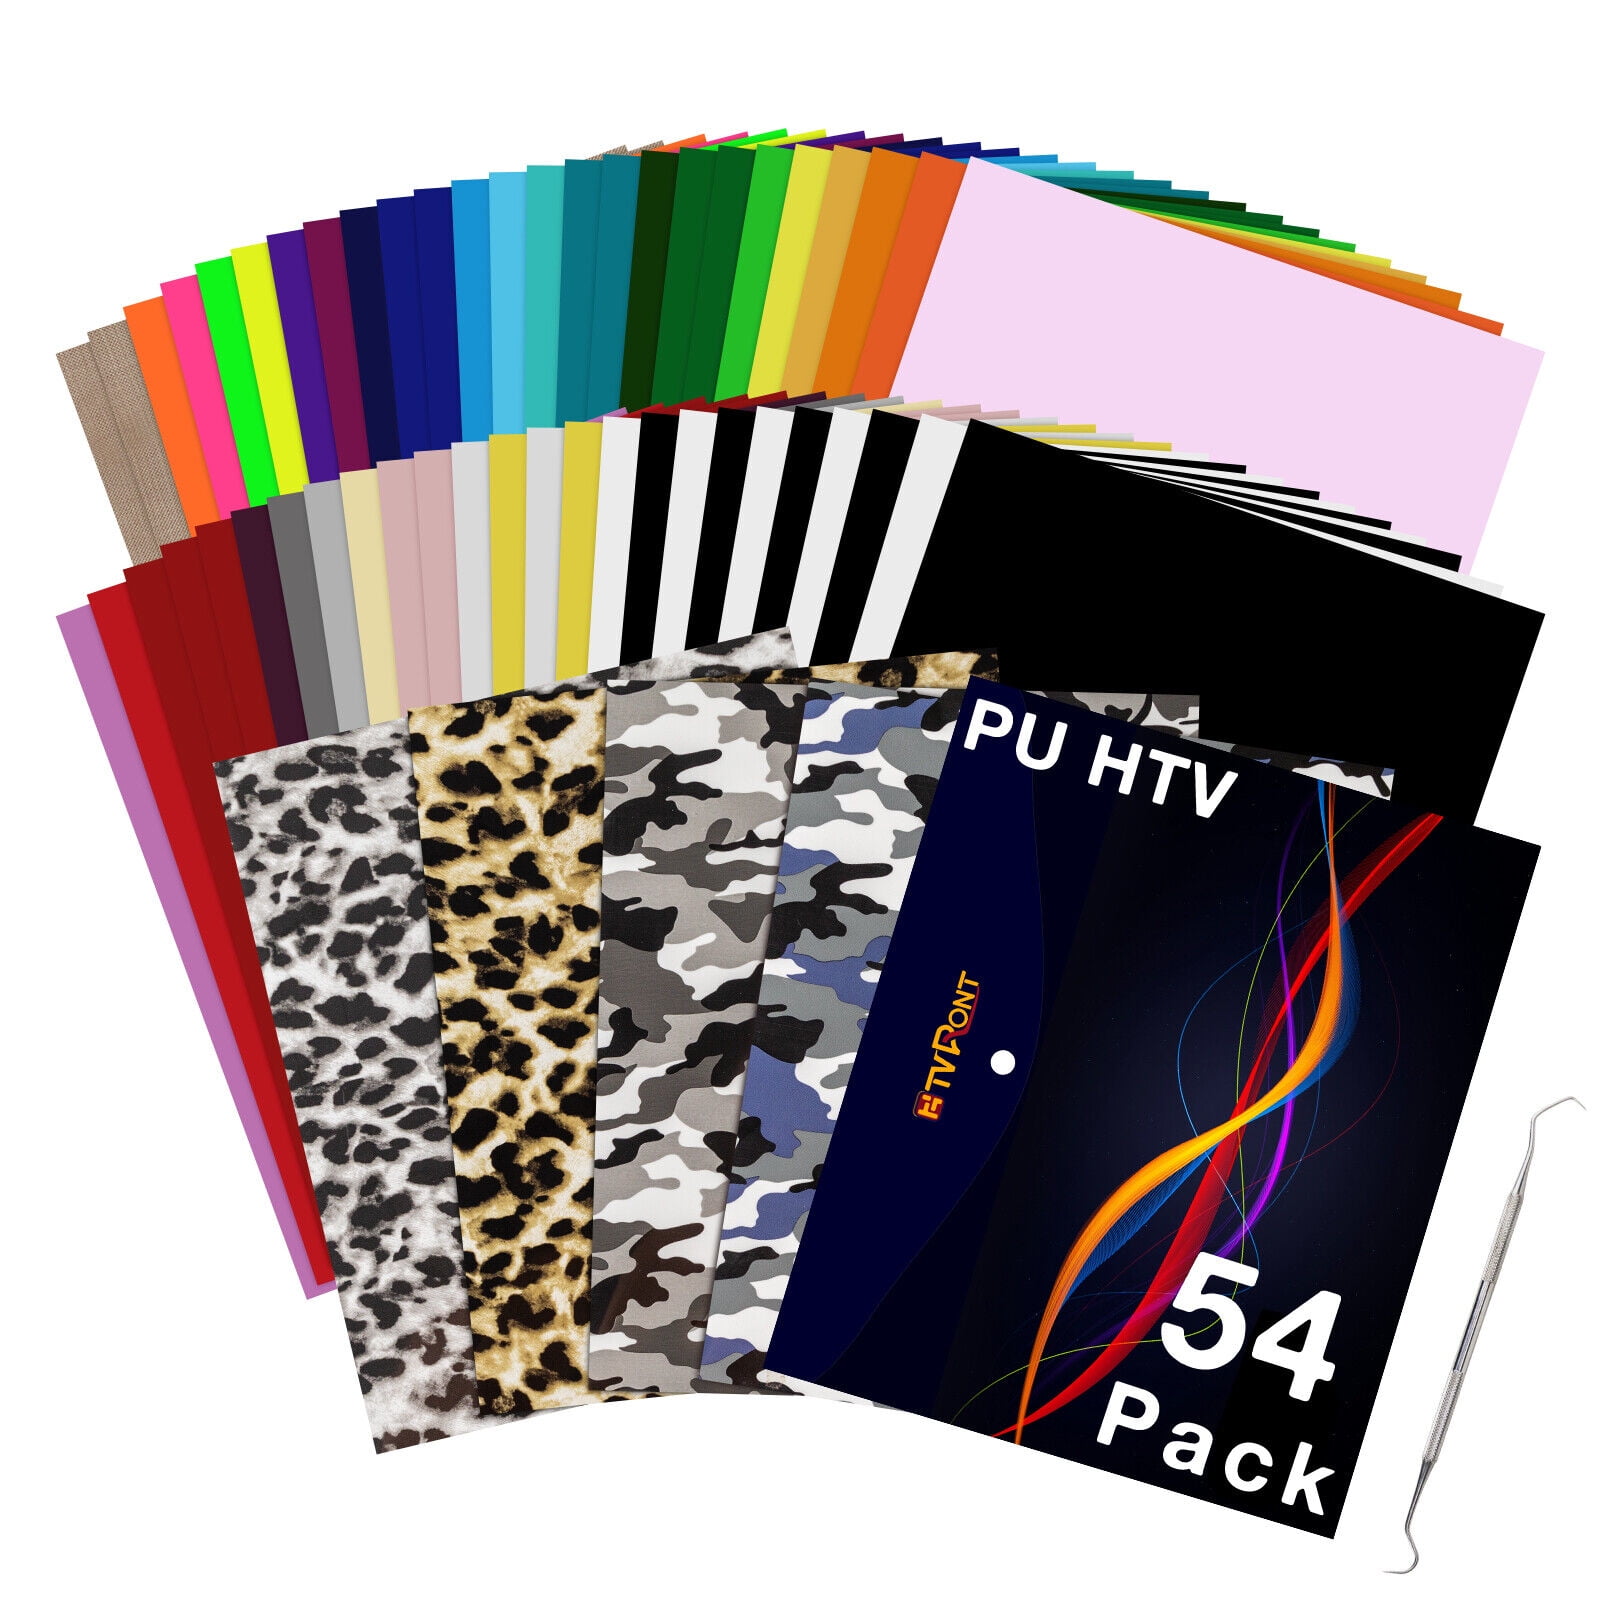 HTV Heat Transfer Vinyl Bundle Easy to Cut & Weed for Heat Vinyl Design 12 x 12 28 Assorted Colors PU Heat Transfer Vinyl 40 Pack Iron on Vinyl for T-Shirt 